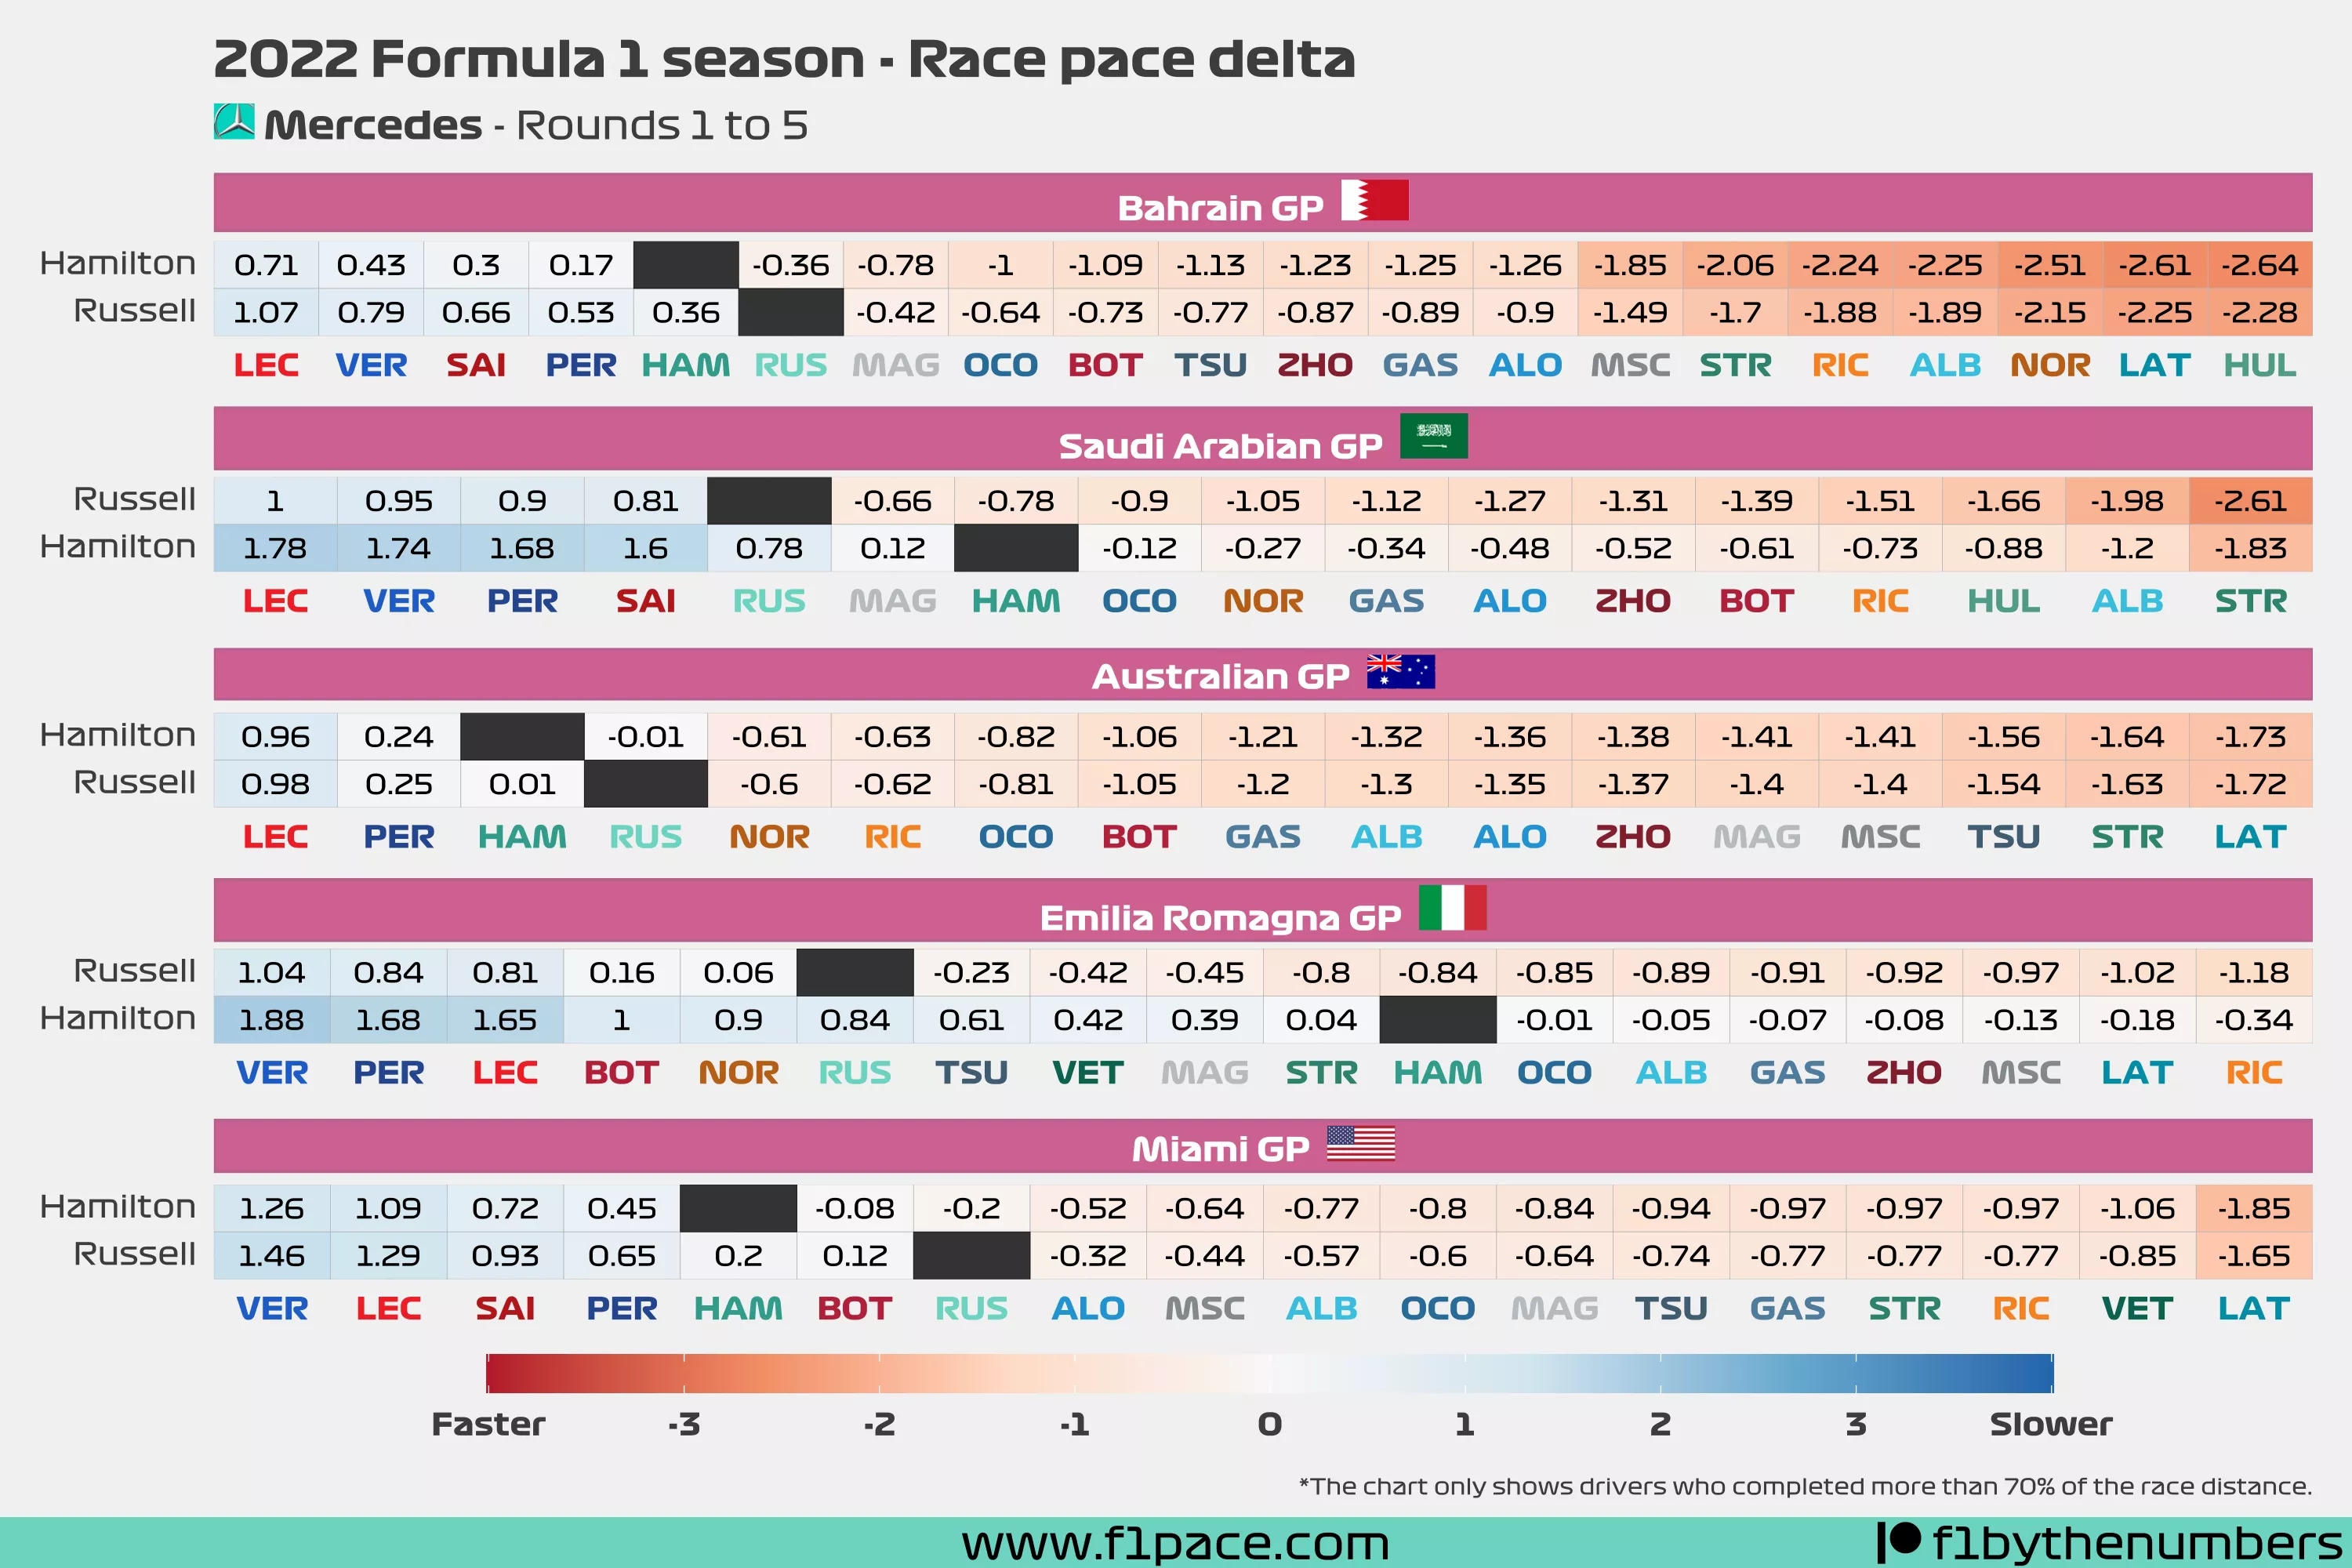 Race pace delta: Rounds to 1 to 5 - Mercedes